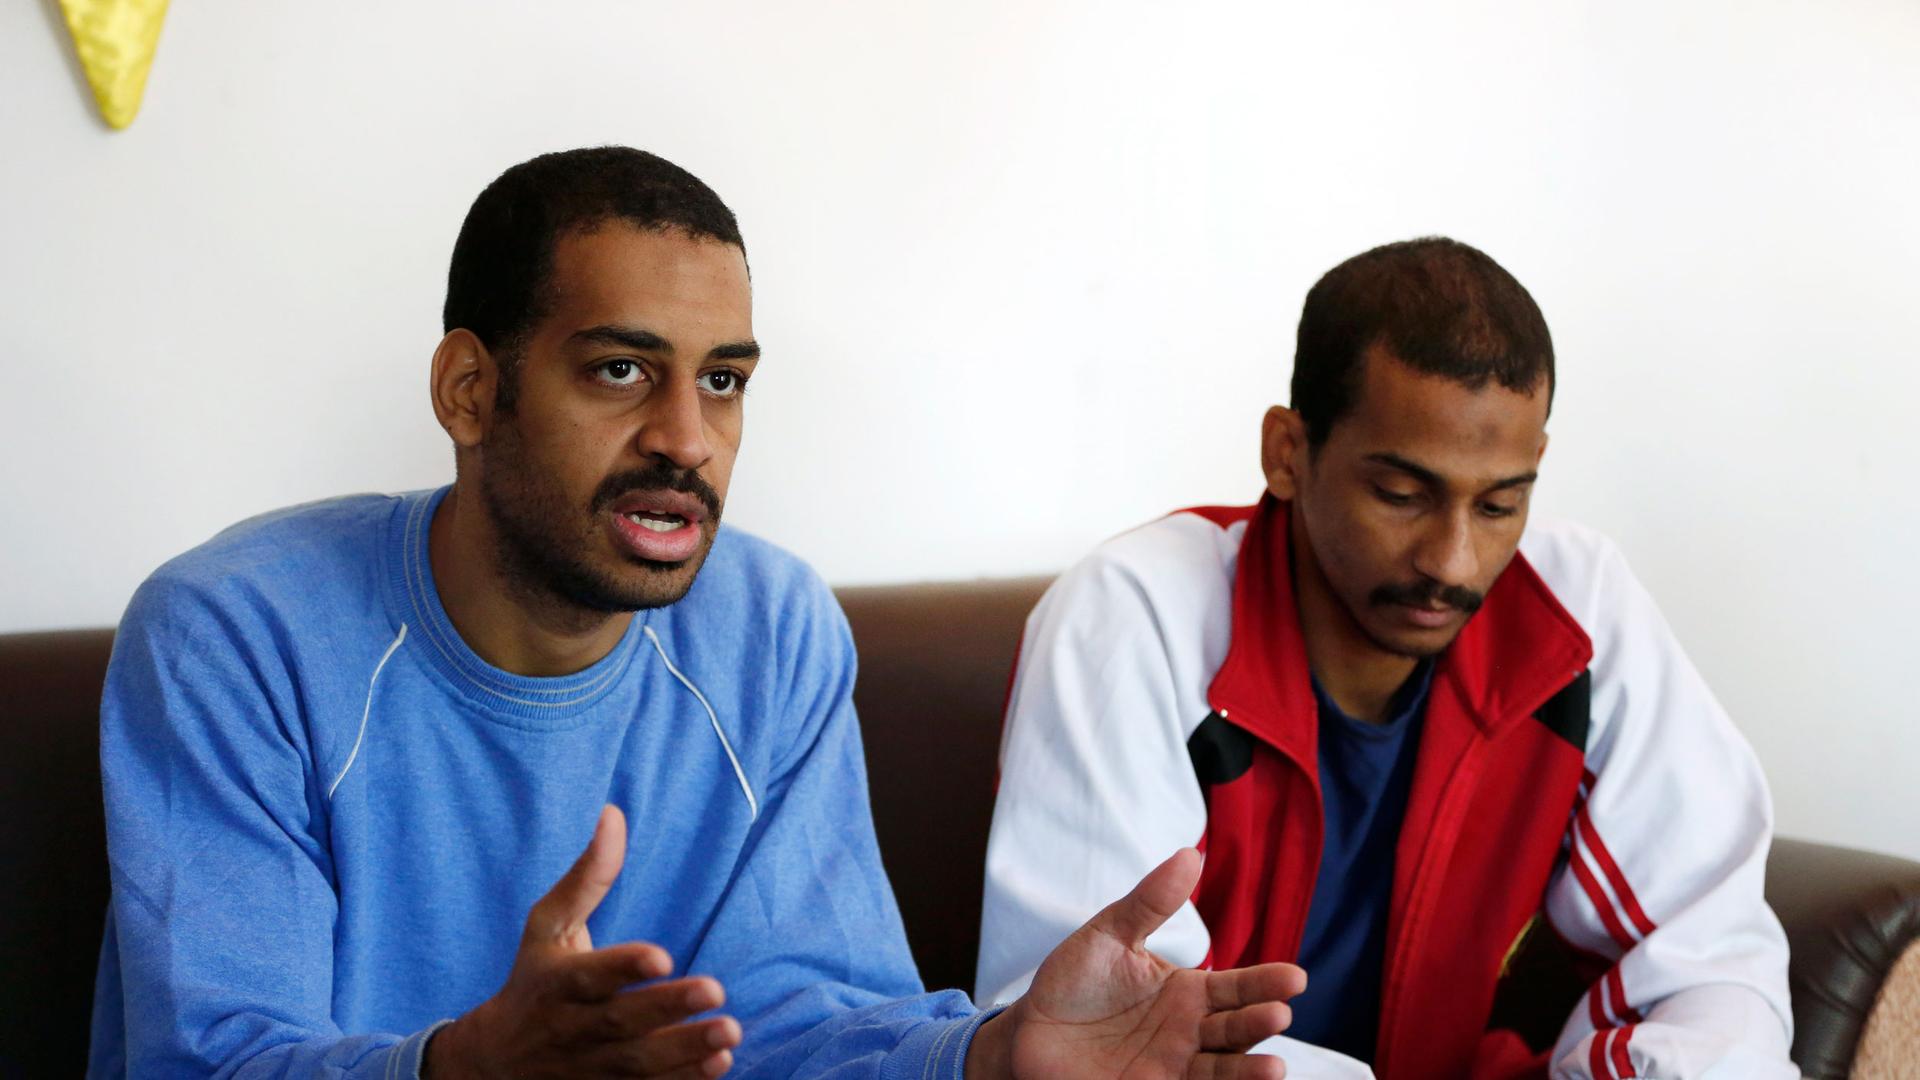 Two men are shown sitting on a sofa with Alexanda Amon Kotey on the left, wearing a blue sweatshirt.